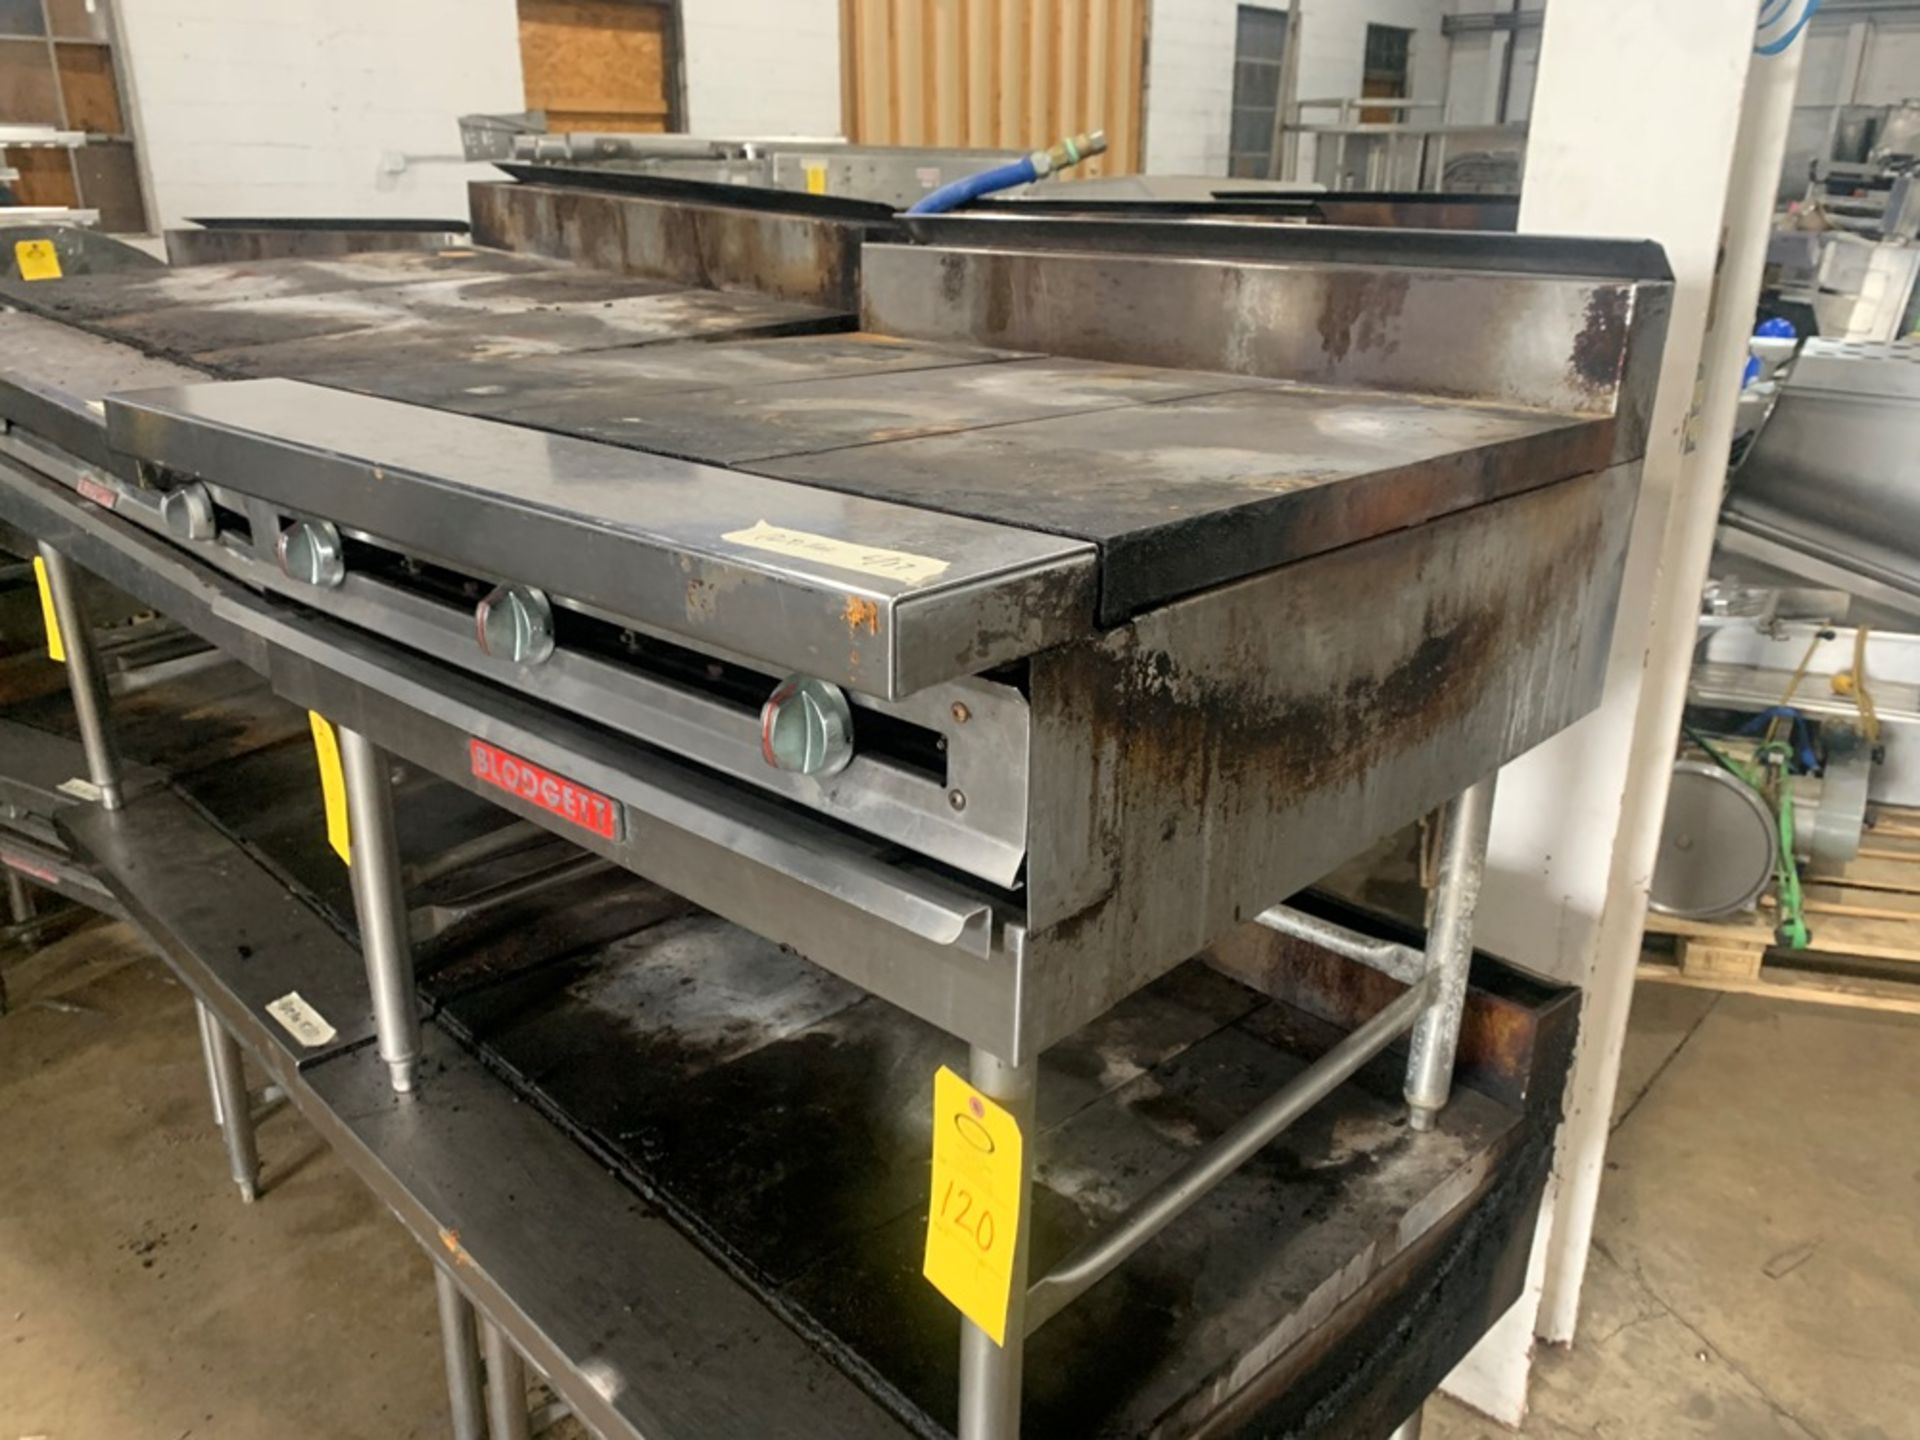 Blodgett 3-Burner Grills, 36" X 28" top, natural gas (Located in Plano, IL) - Image 2 of 4